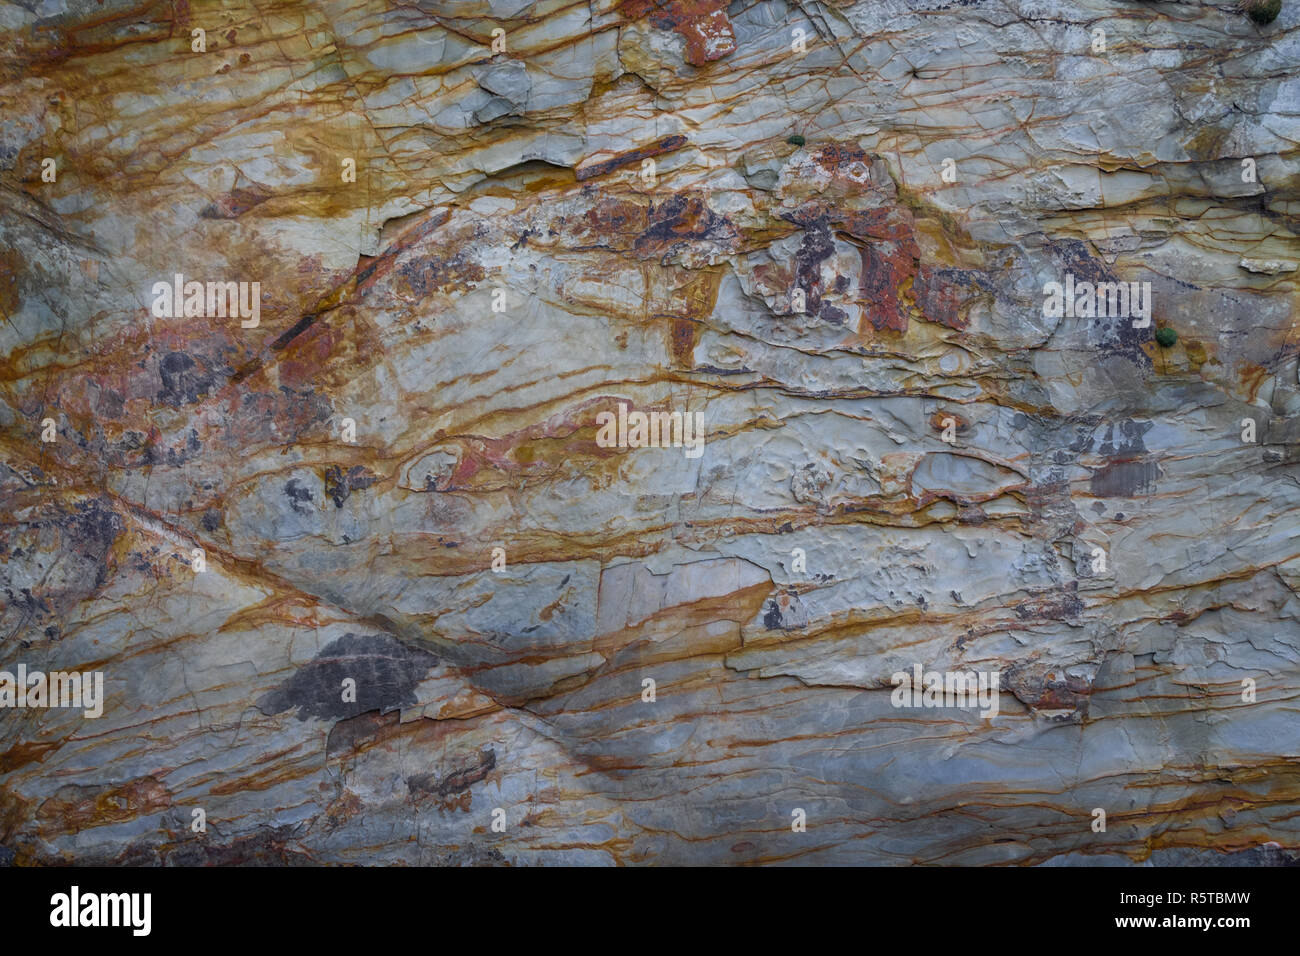 iron oxide or mineral staining on a mudstone or shale cliff southern irish coast, sandy cove, castlehaven, west cork, ireland. Stock Photo